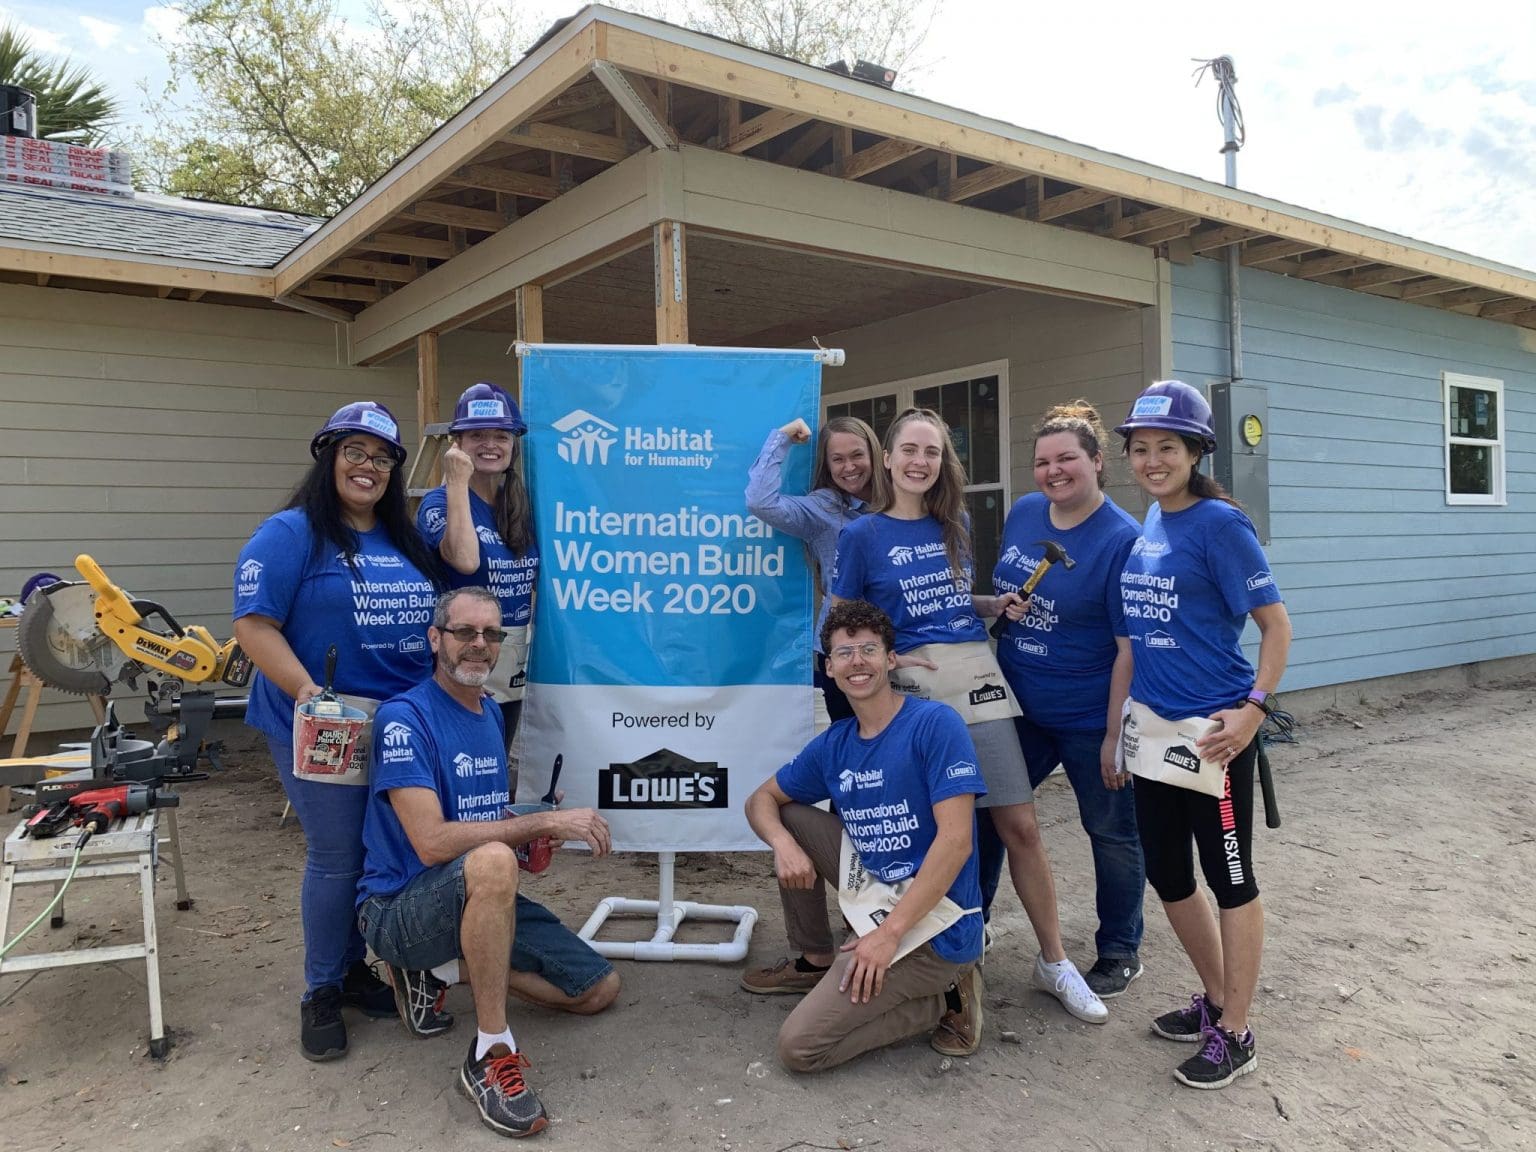 Women Build with Habitat for Humanity allows females to learn new skills